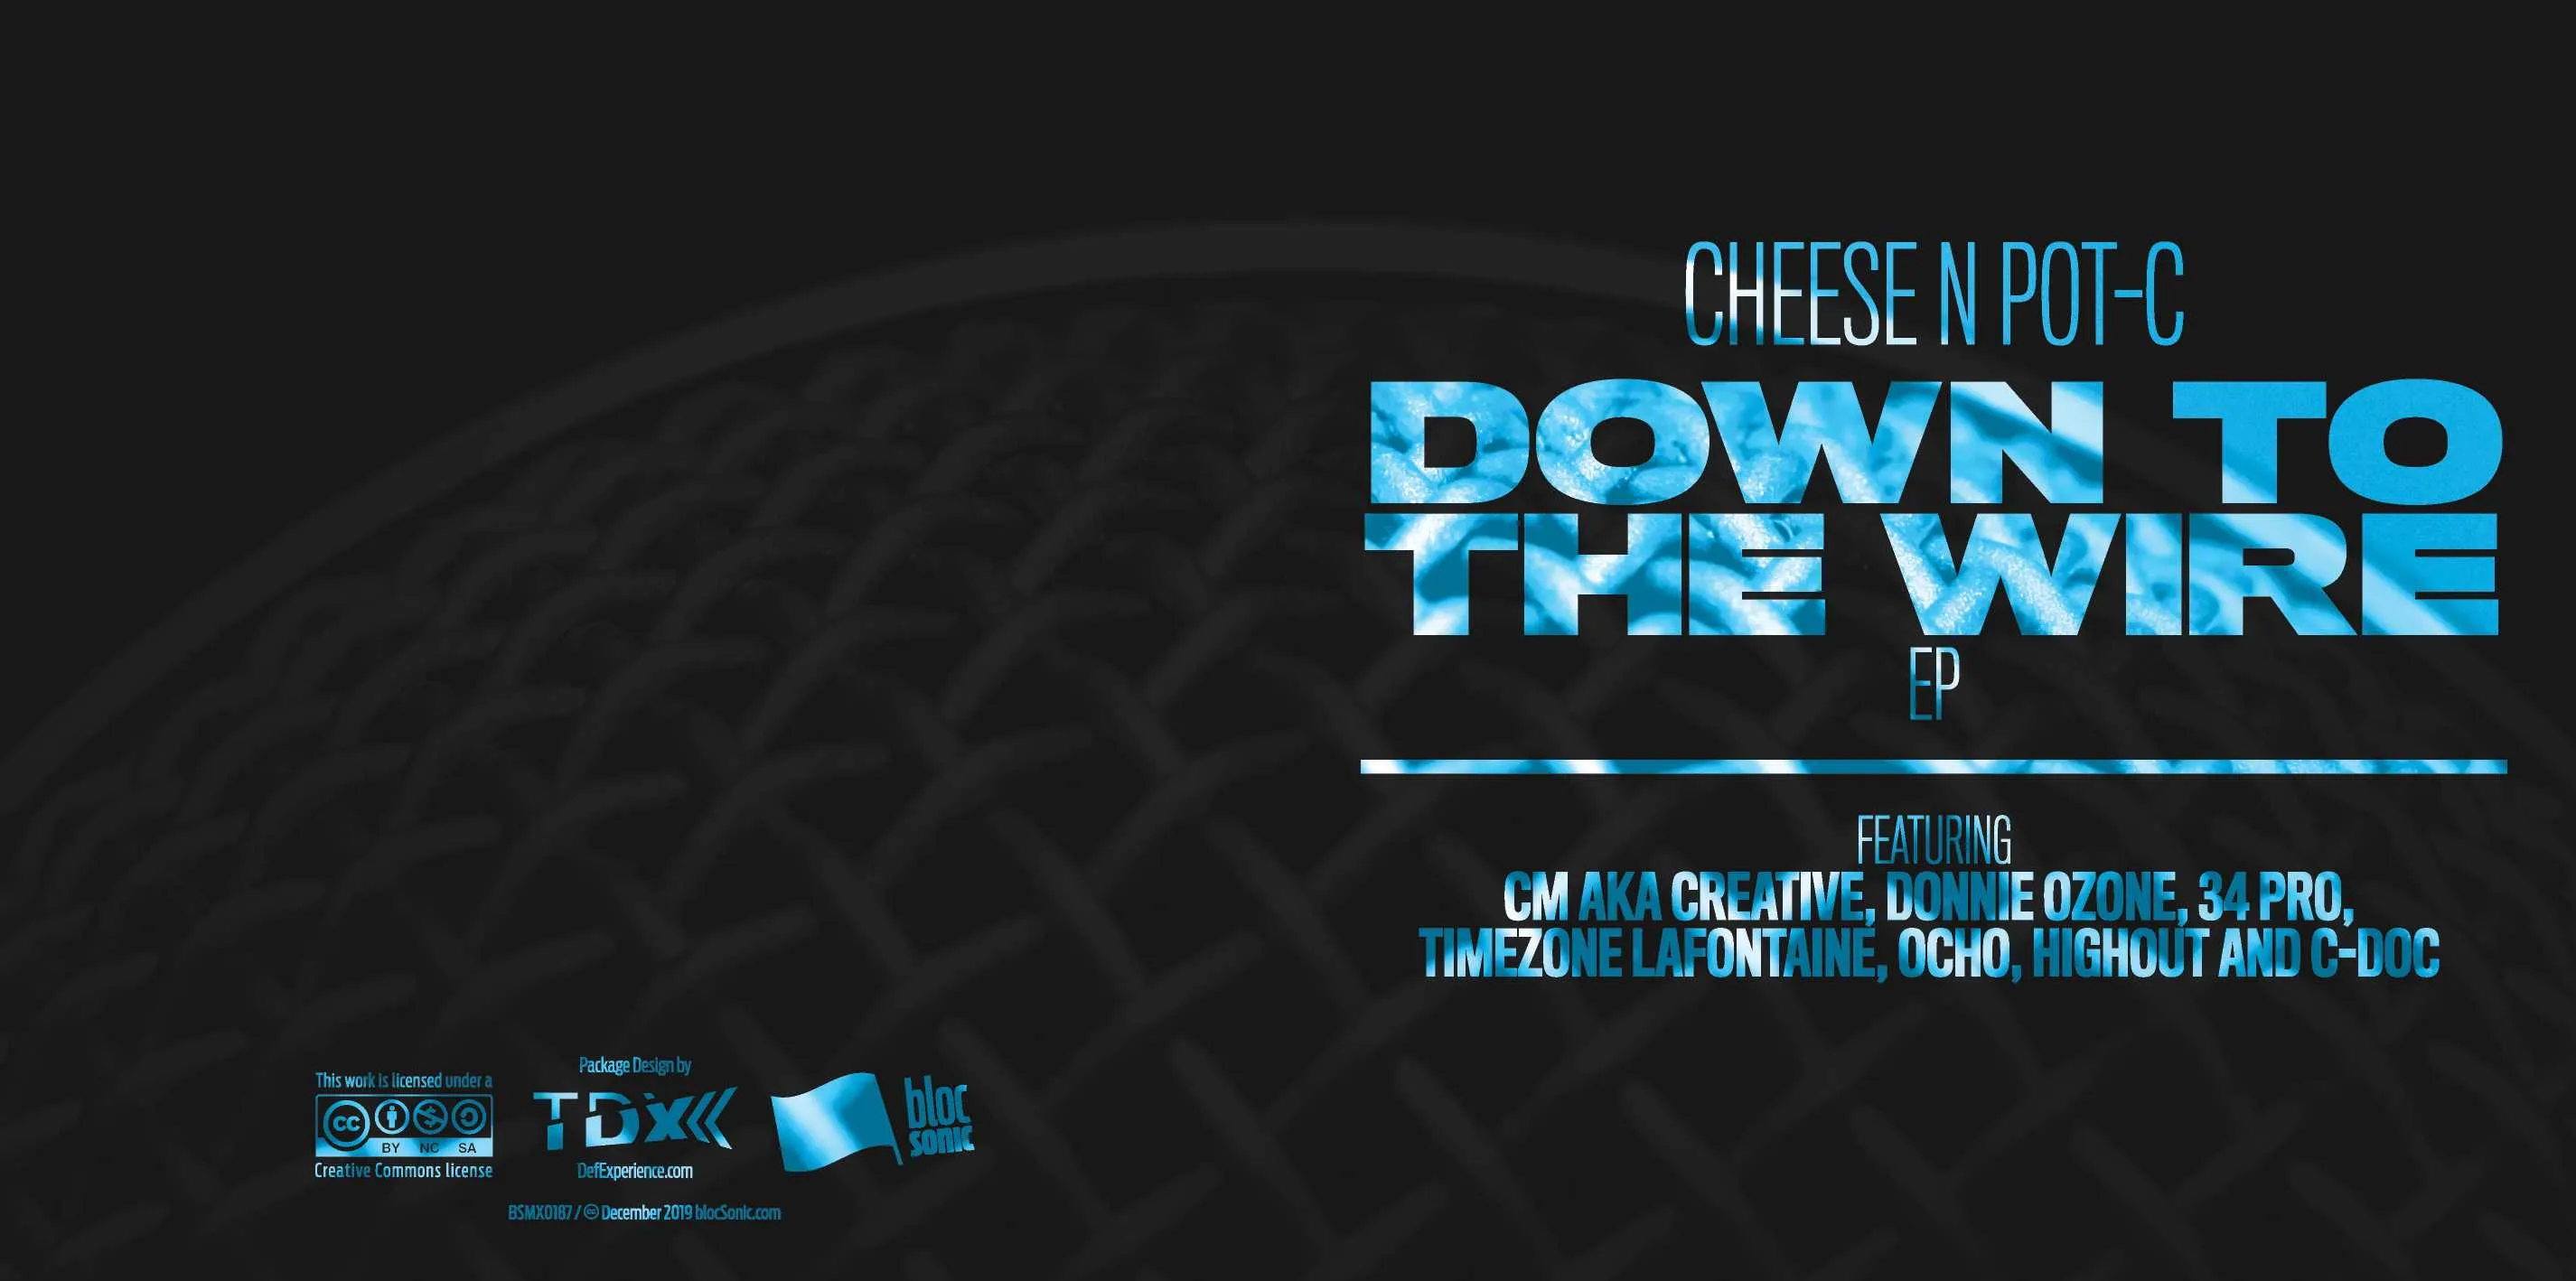 Album insert for “Down To The Wire EP” by Cheese N Pot-C